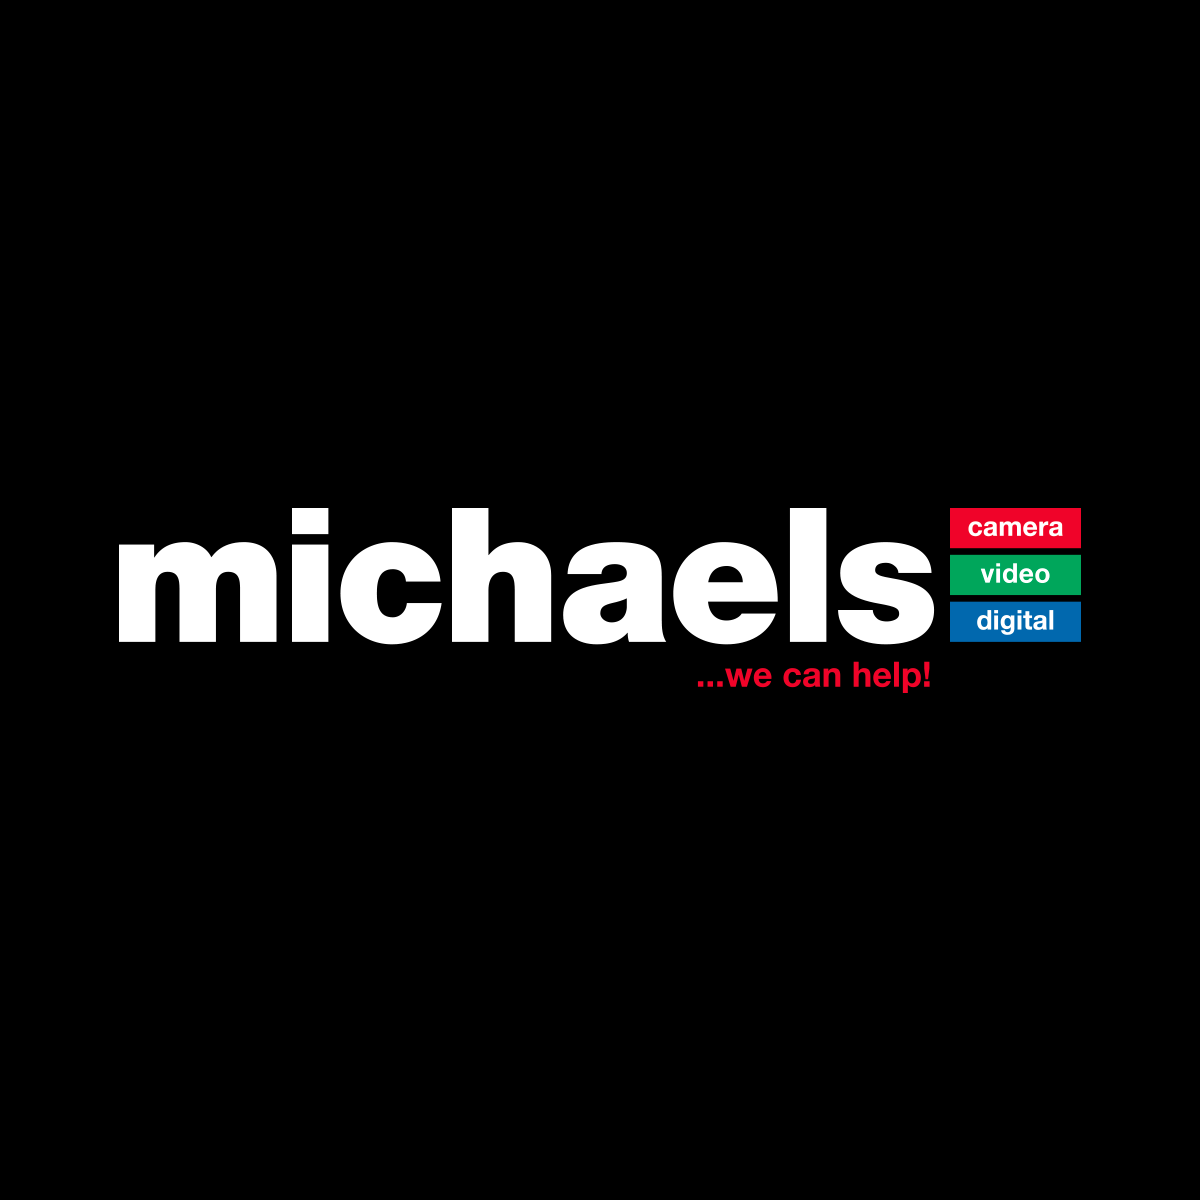 michaels is one of Australia's largest photographic specialists. It's the must-visit destination for anyone interested in photography, video or digital devices.